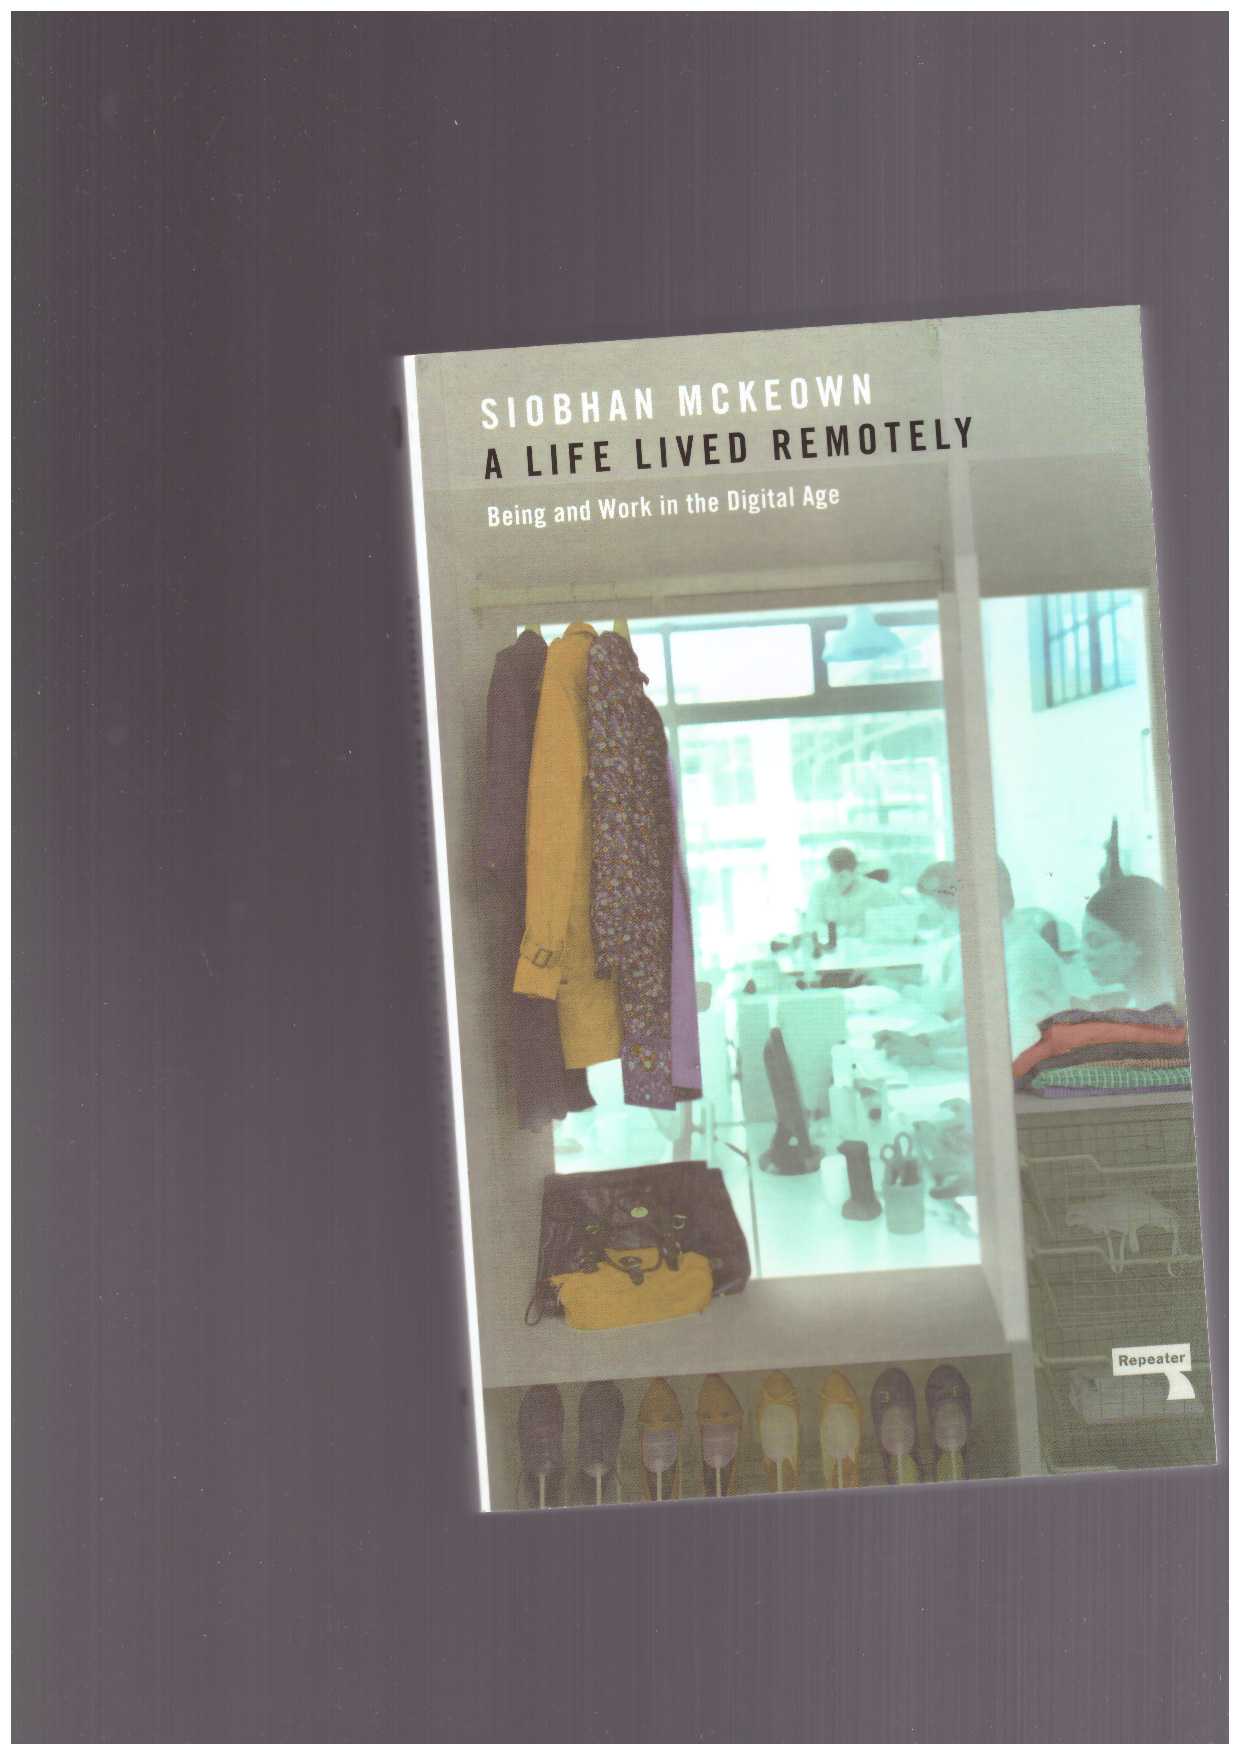  McKEOWN, Siobhan  - A Life Lived Remotely. Being and Work in the Digital Age